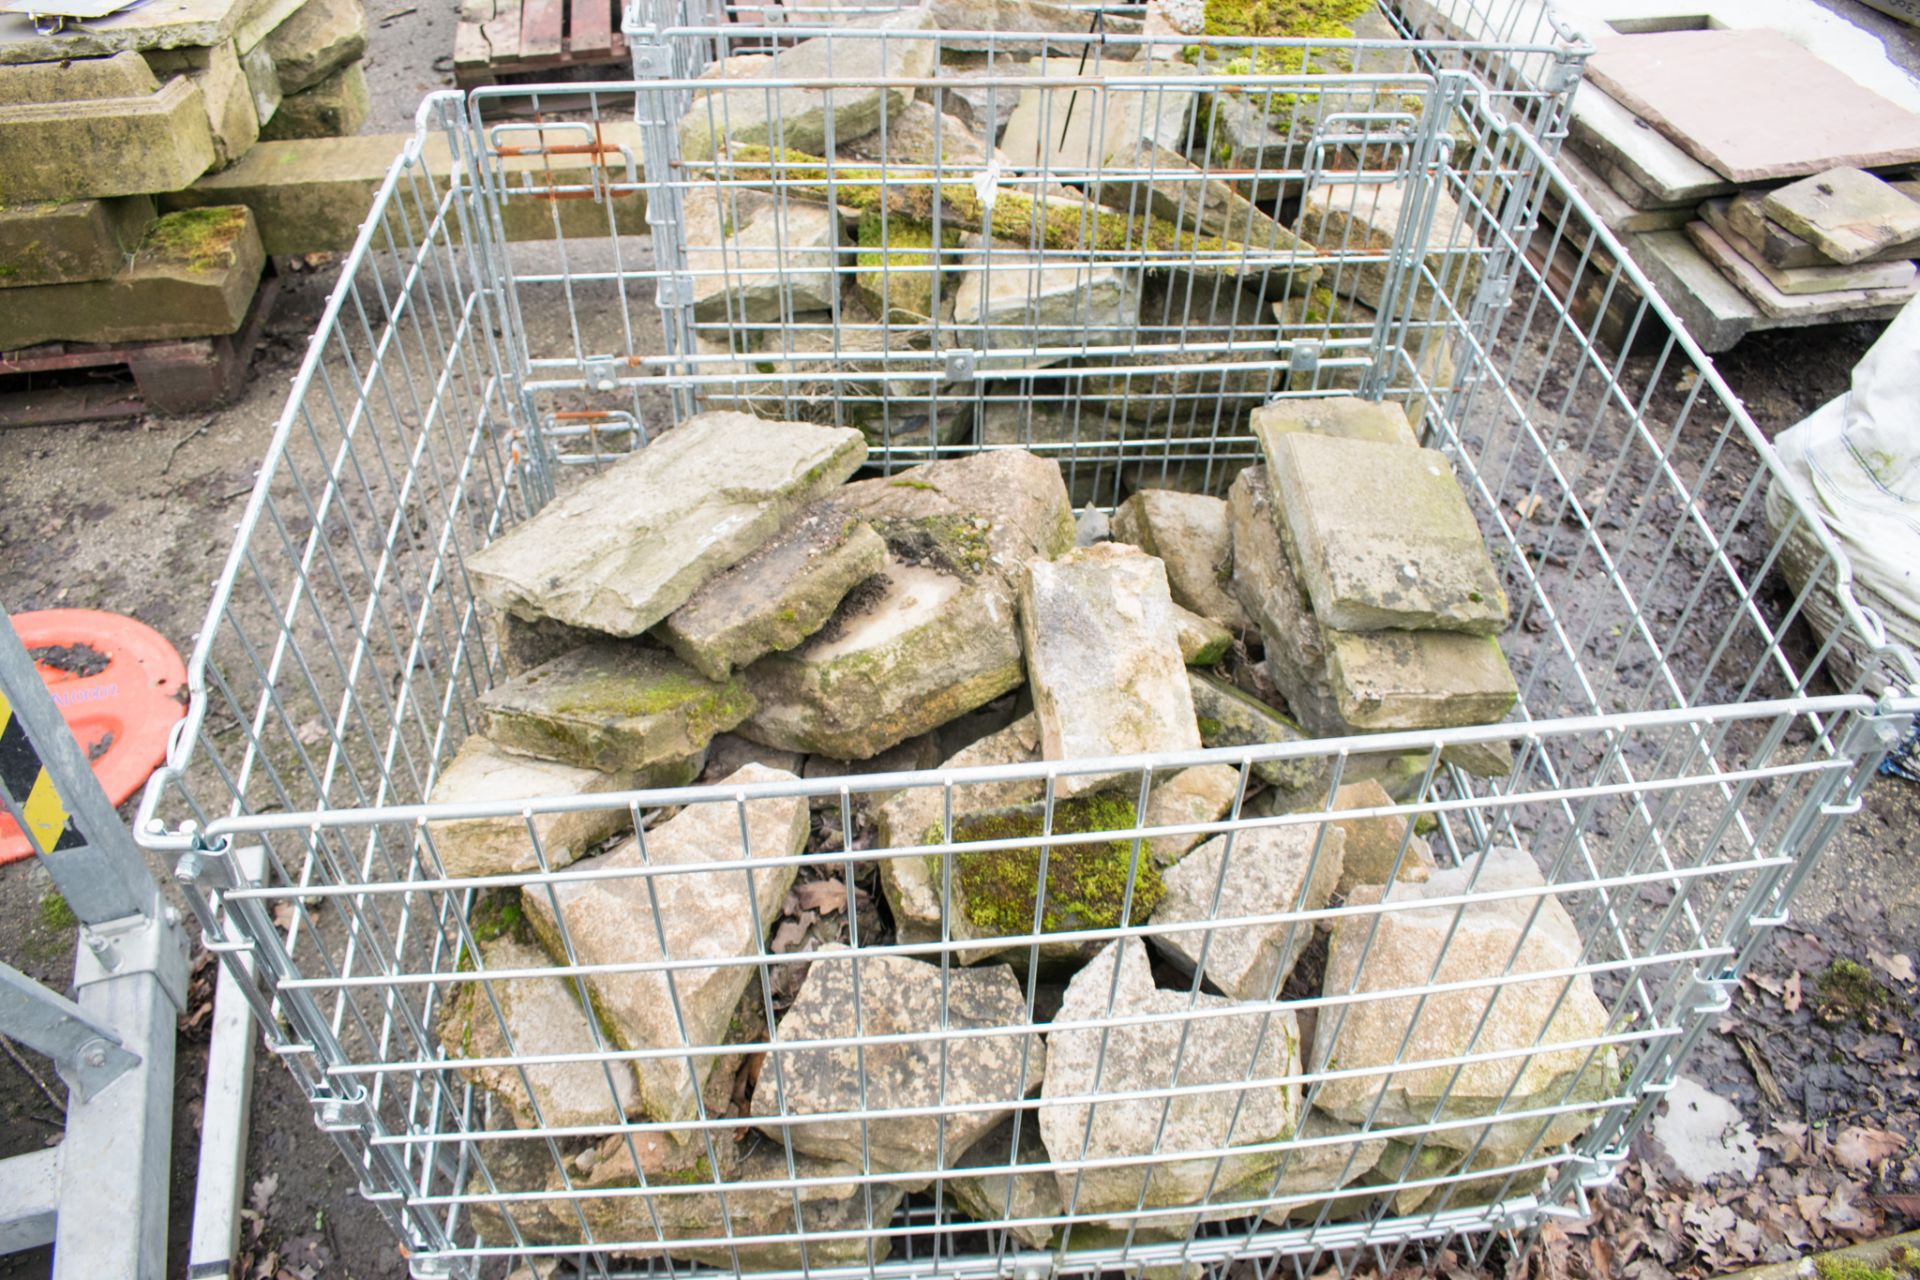 Stillage of miscellaneous stone ** Stillage not included **